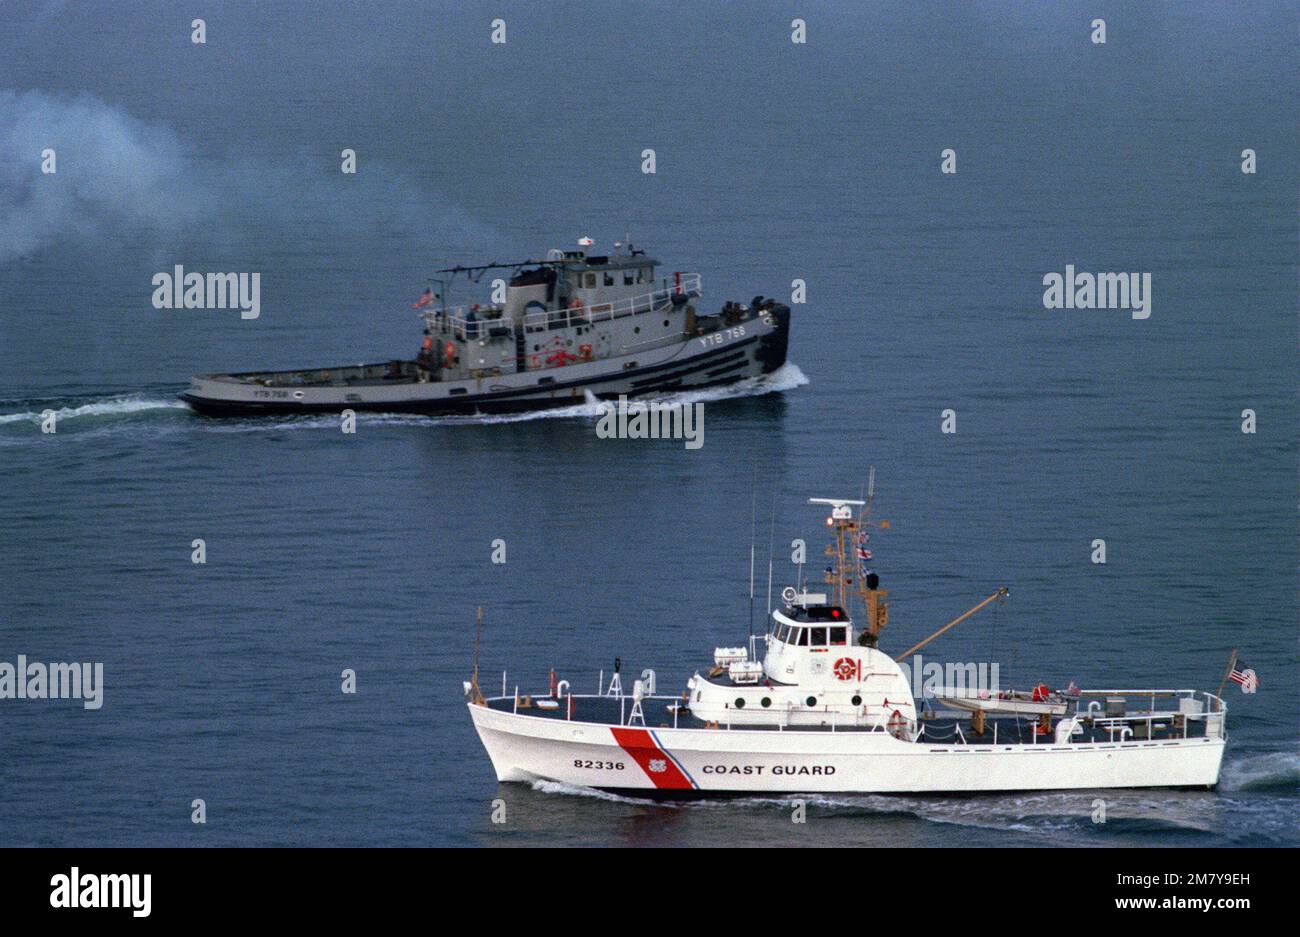 A port view of the Point class patrol boat USCG GLASS (WPB 82336) as it passes the starboard side of the harbor tug ARCATA (YTB 768). Country: Unknown Stock Photo